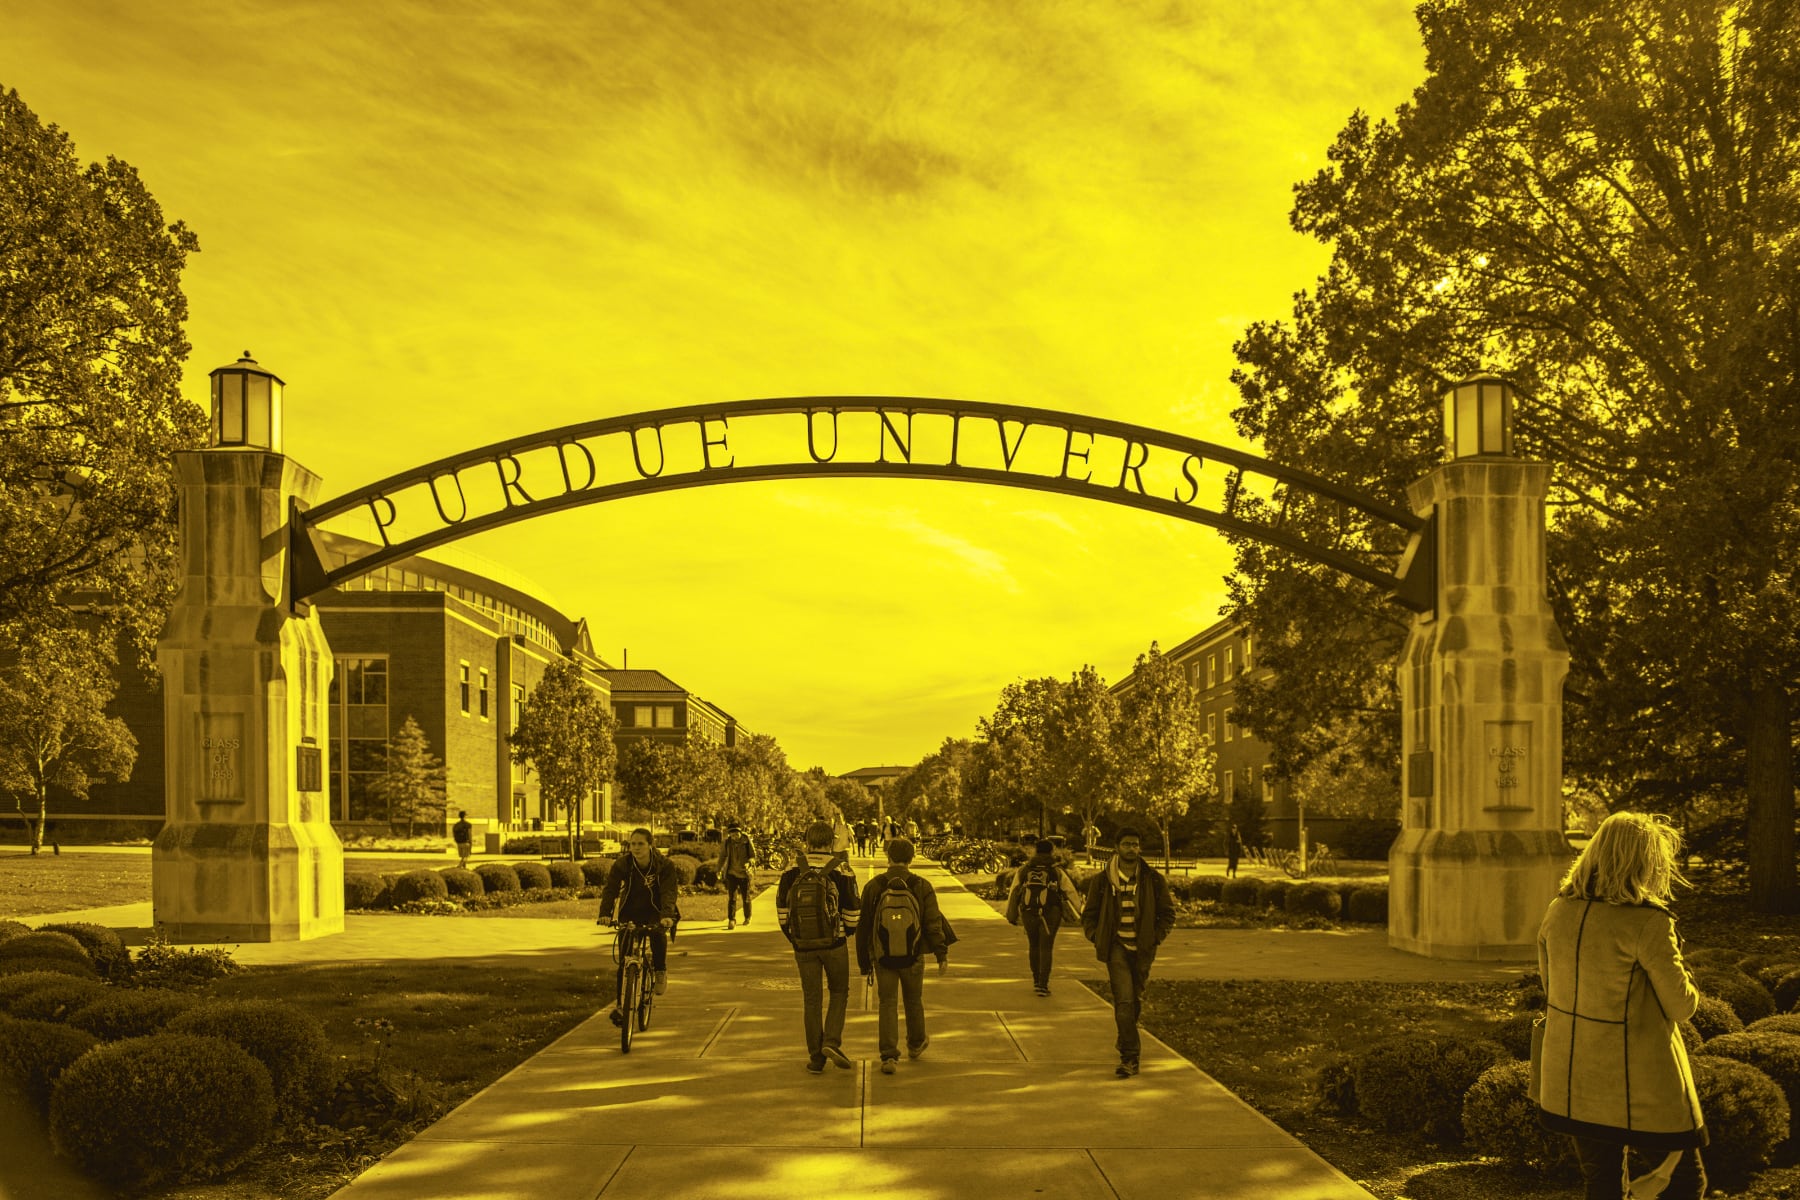 Image of Purdues Gateway on Campus